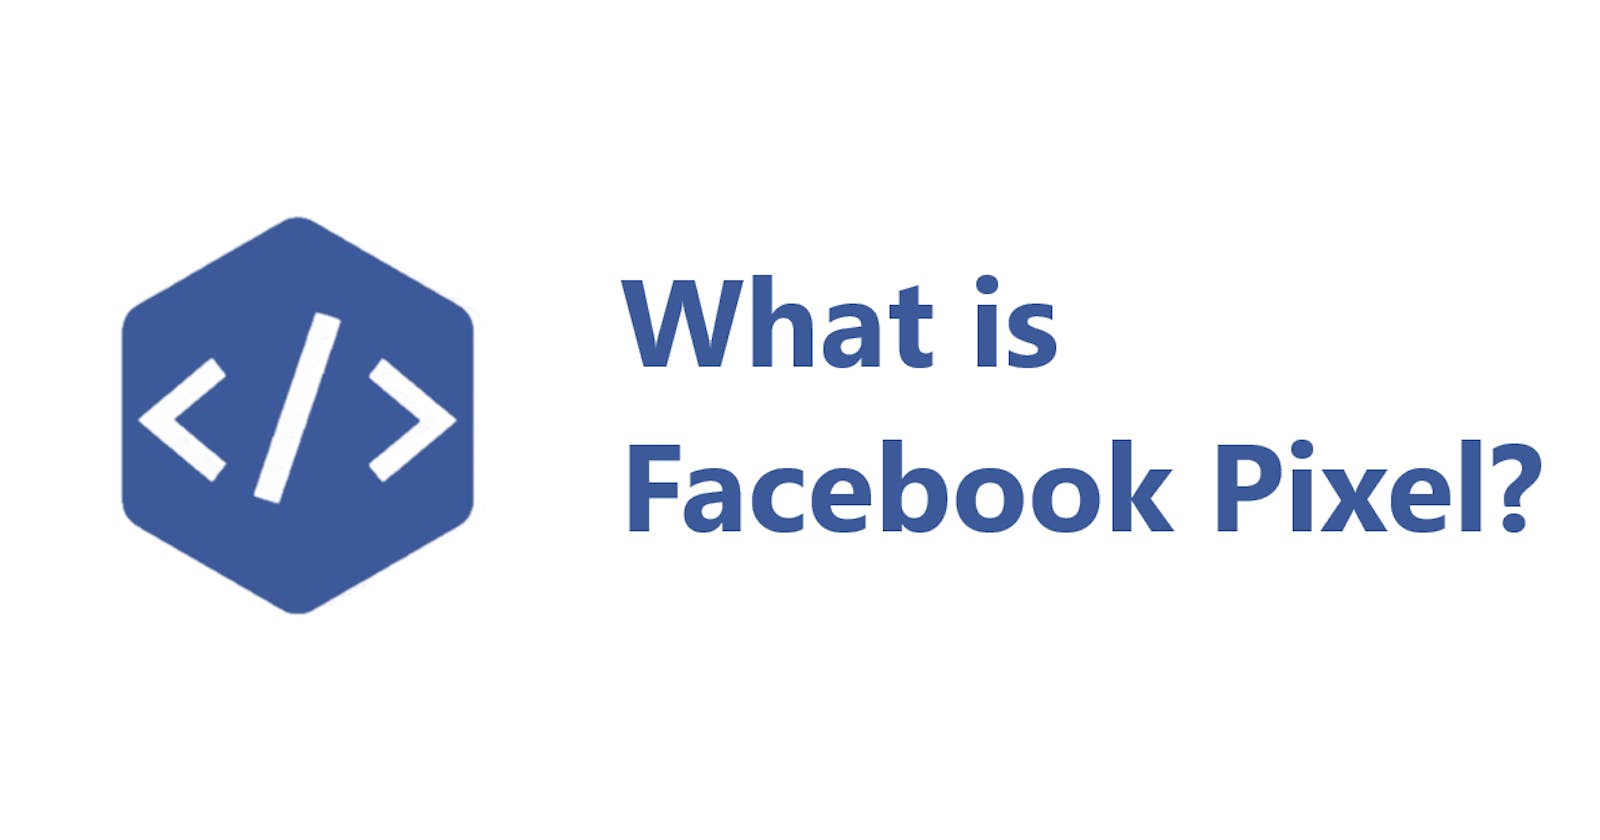 What is Facebook Pixel and how to use it?